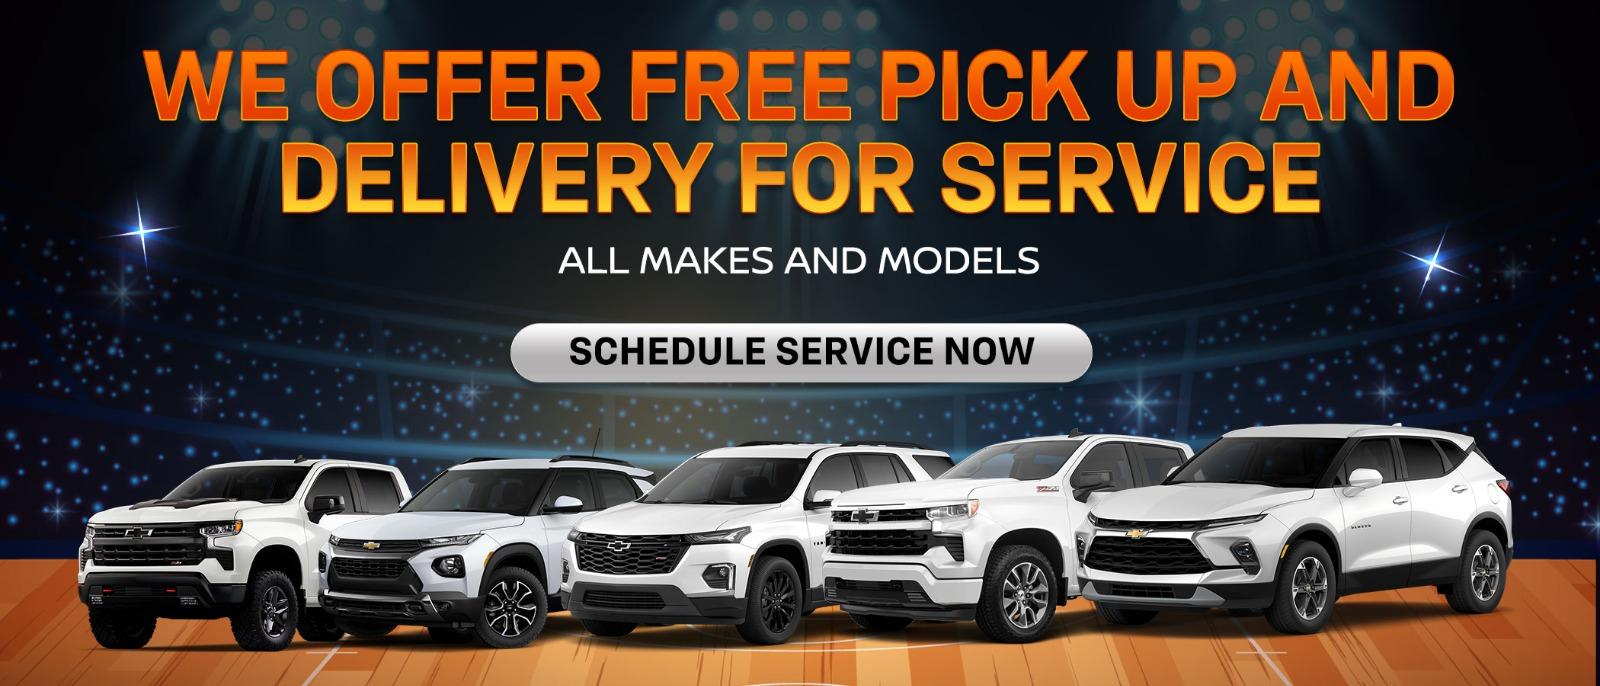 We offer free pick up and Delivery for service
all makes and models